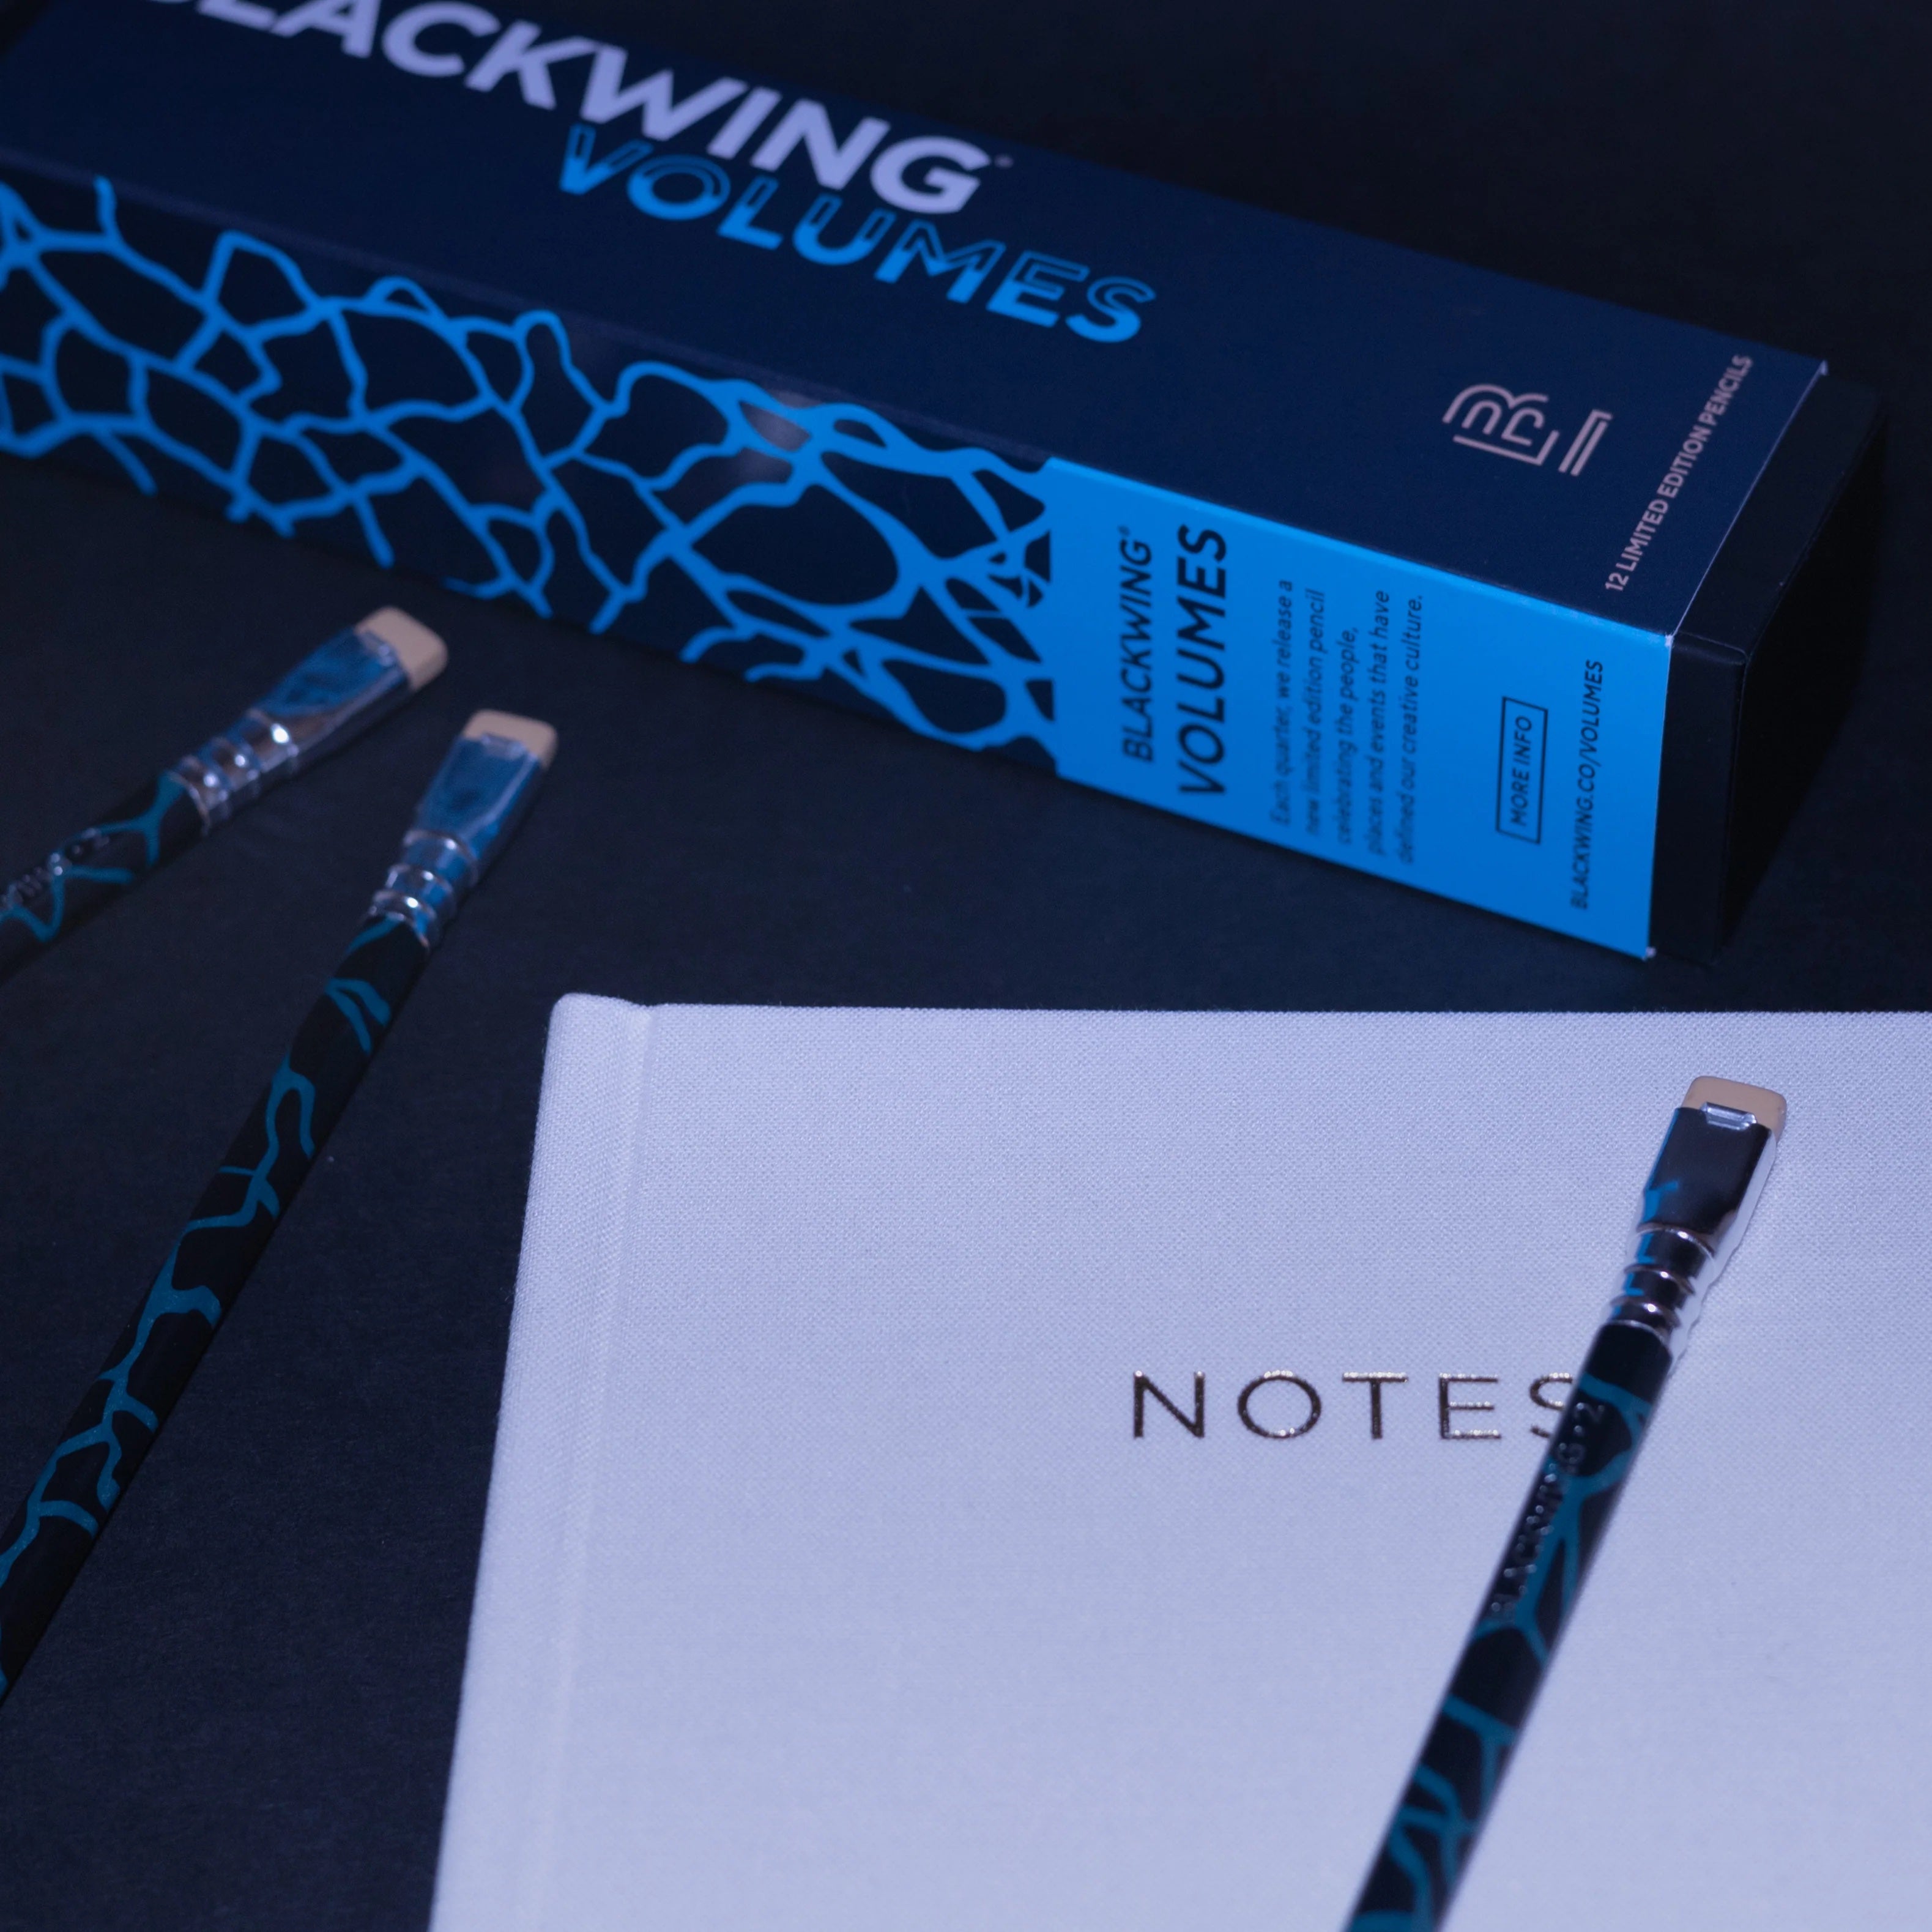 Blackwing Volume 2 Limited Edition Pencils - 2X Firm - Box of 12